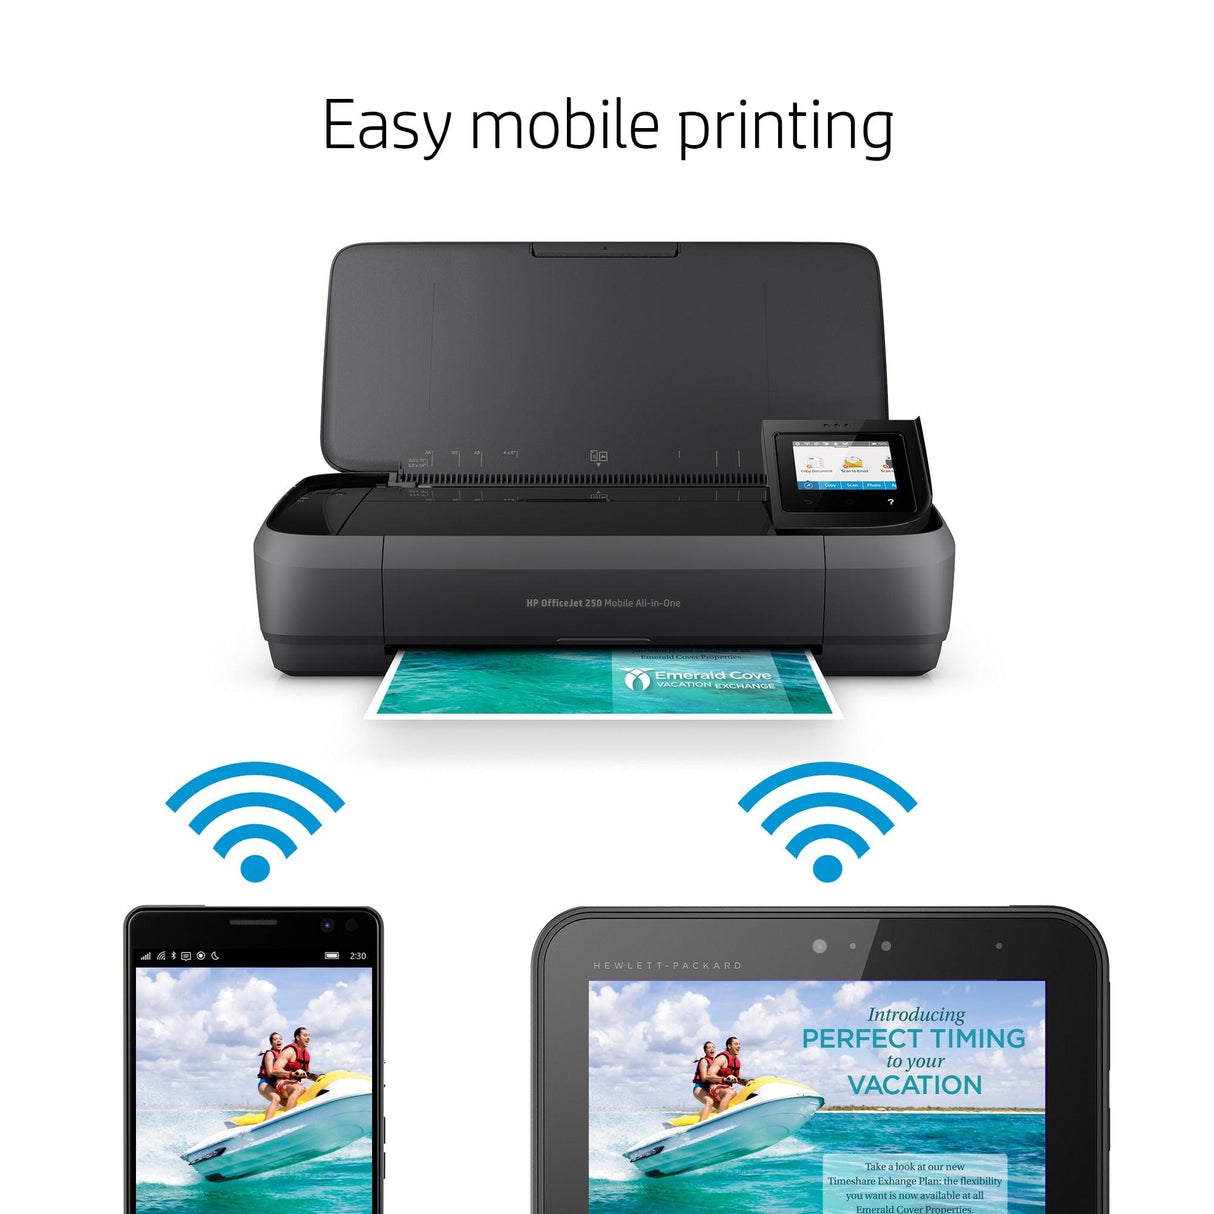 HP OfficeJet 250 Mobile All-in-One Printer (CZ992A)